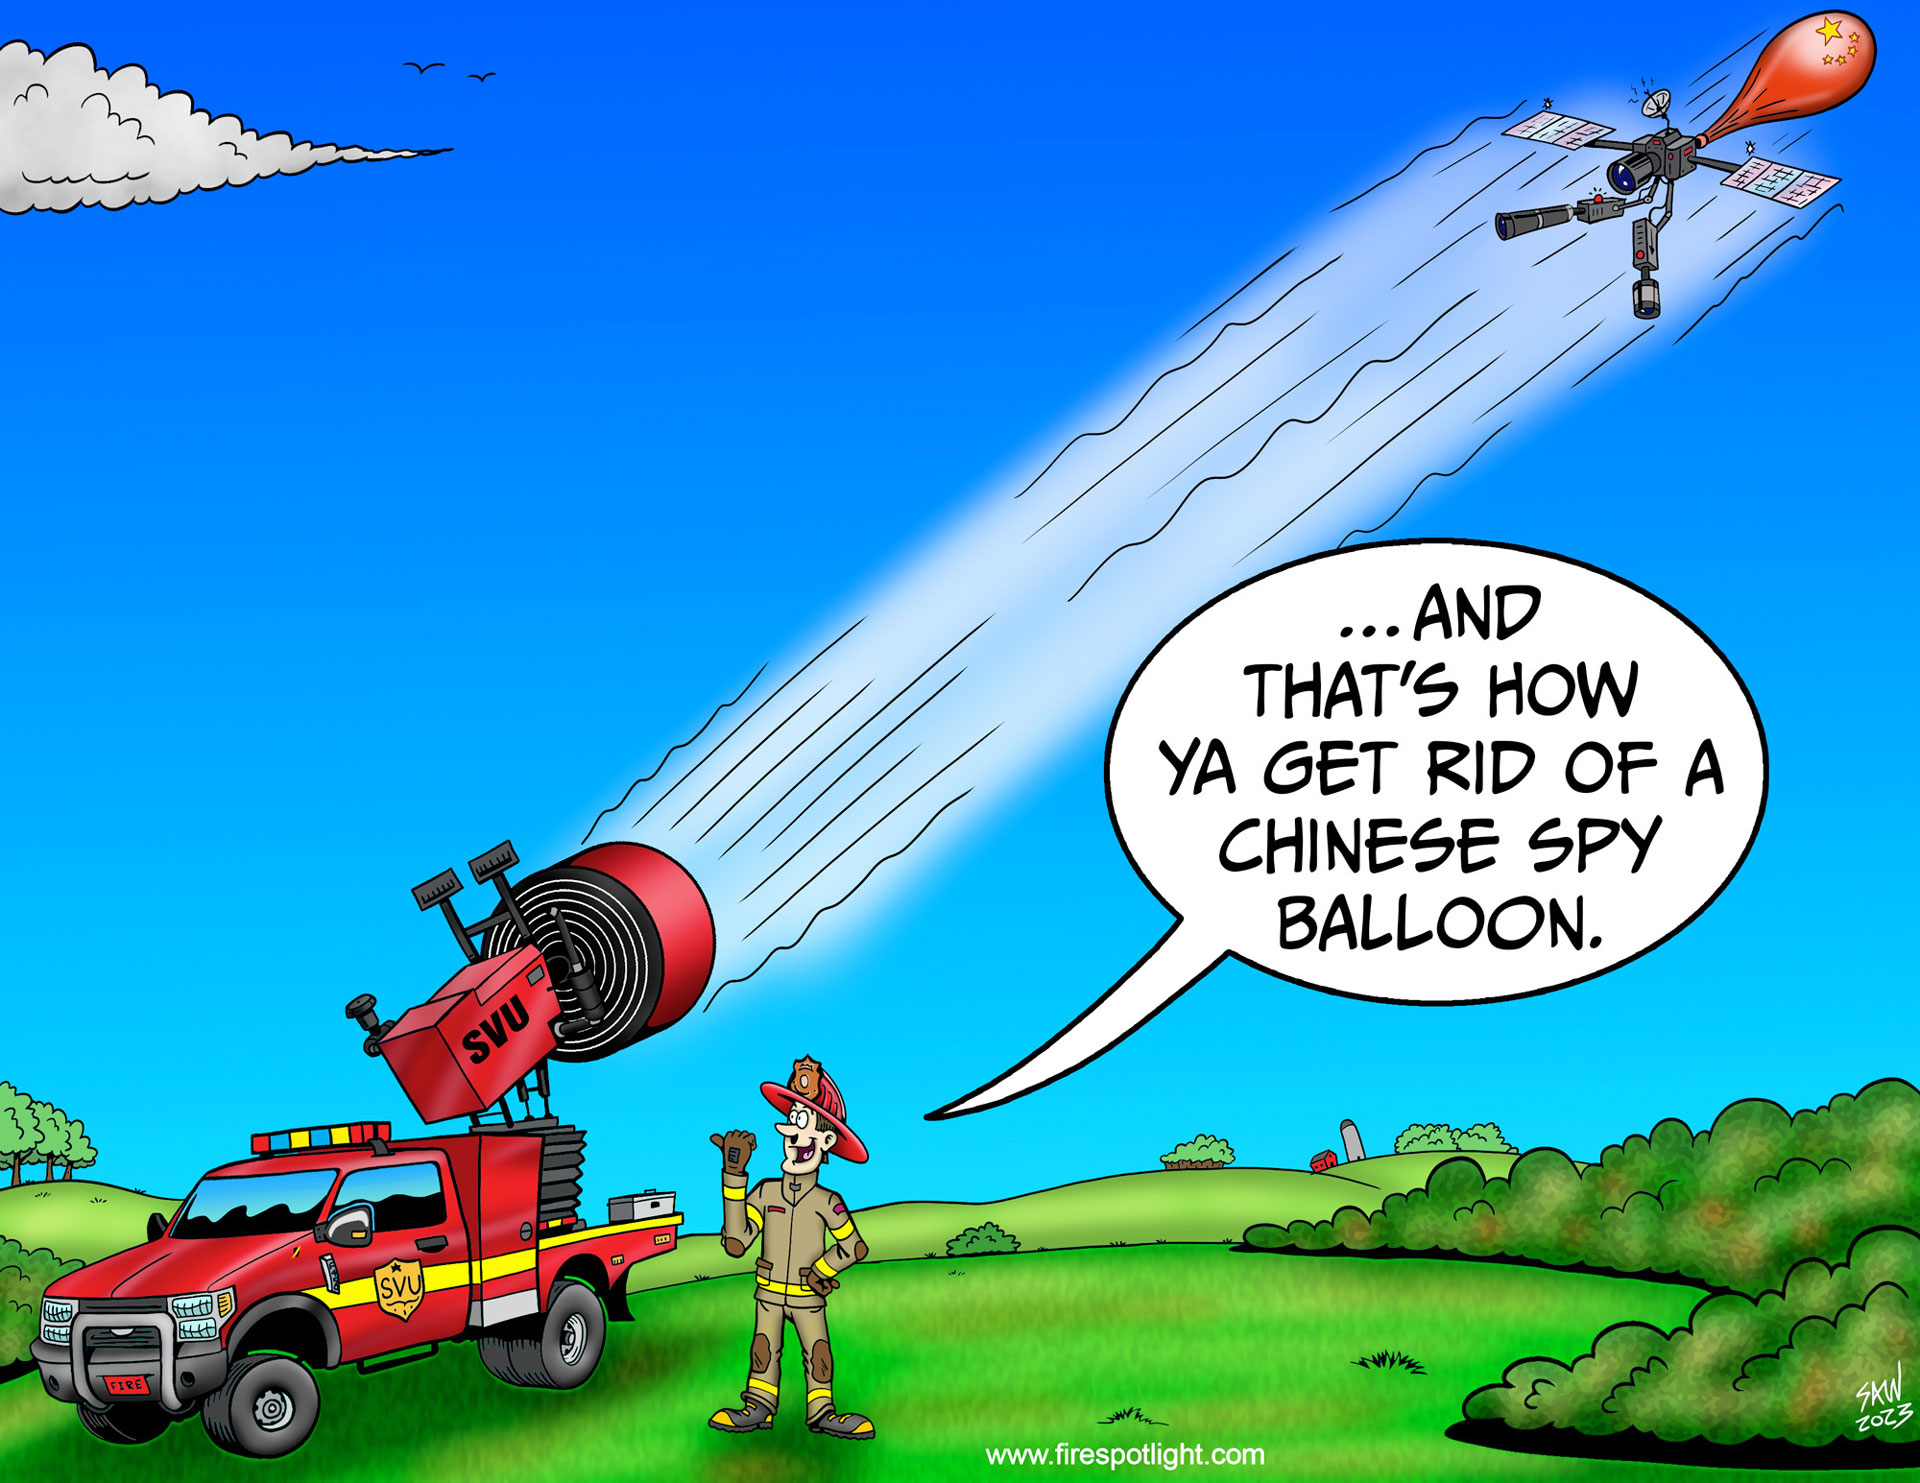 Featured image for “How to Get Rid of a Chinese Spy Balloon”